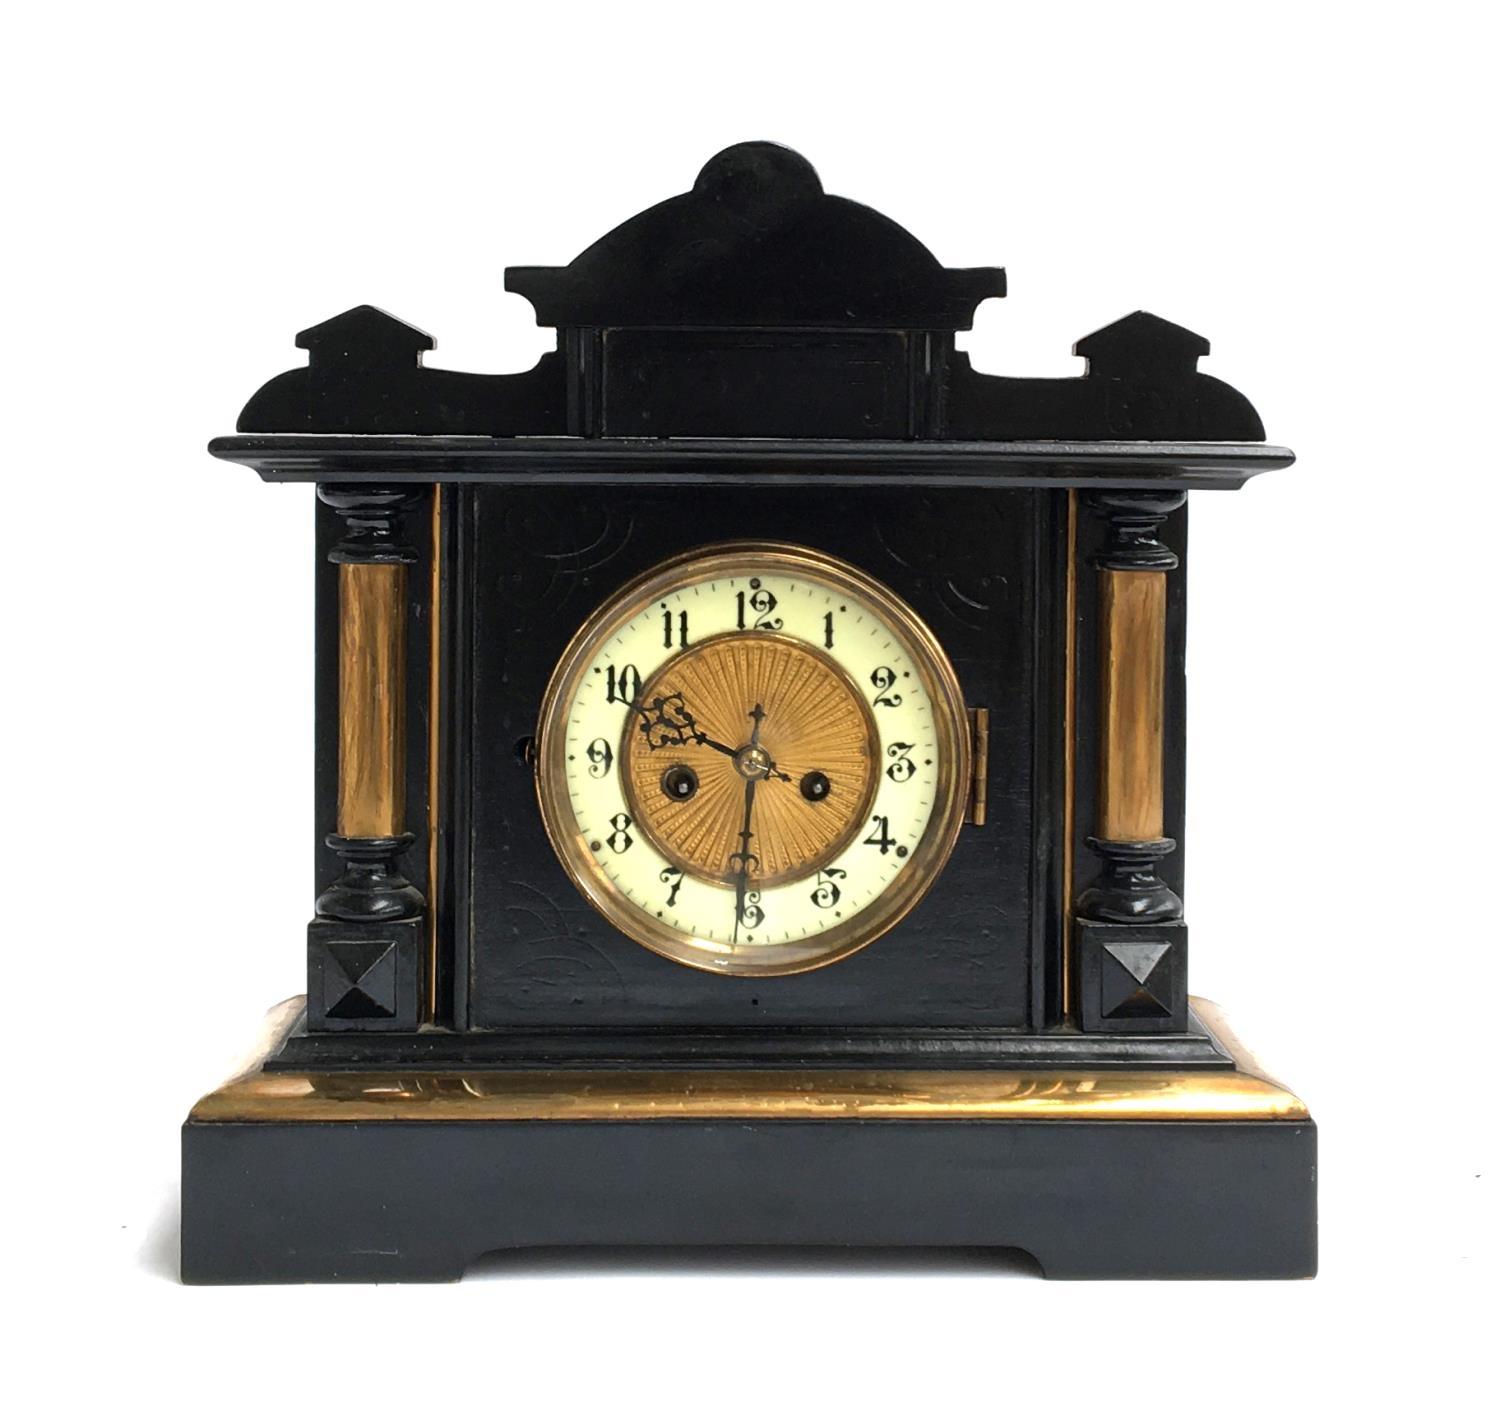 An ebonised mantel clock, dial with Arabic numerals, flanked by columns on either side